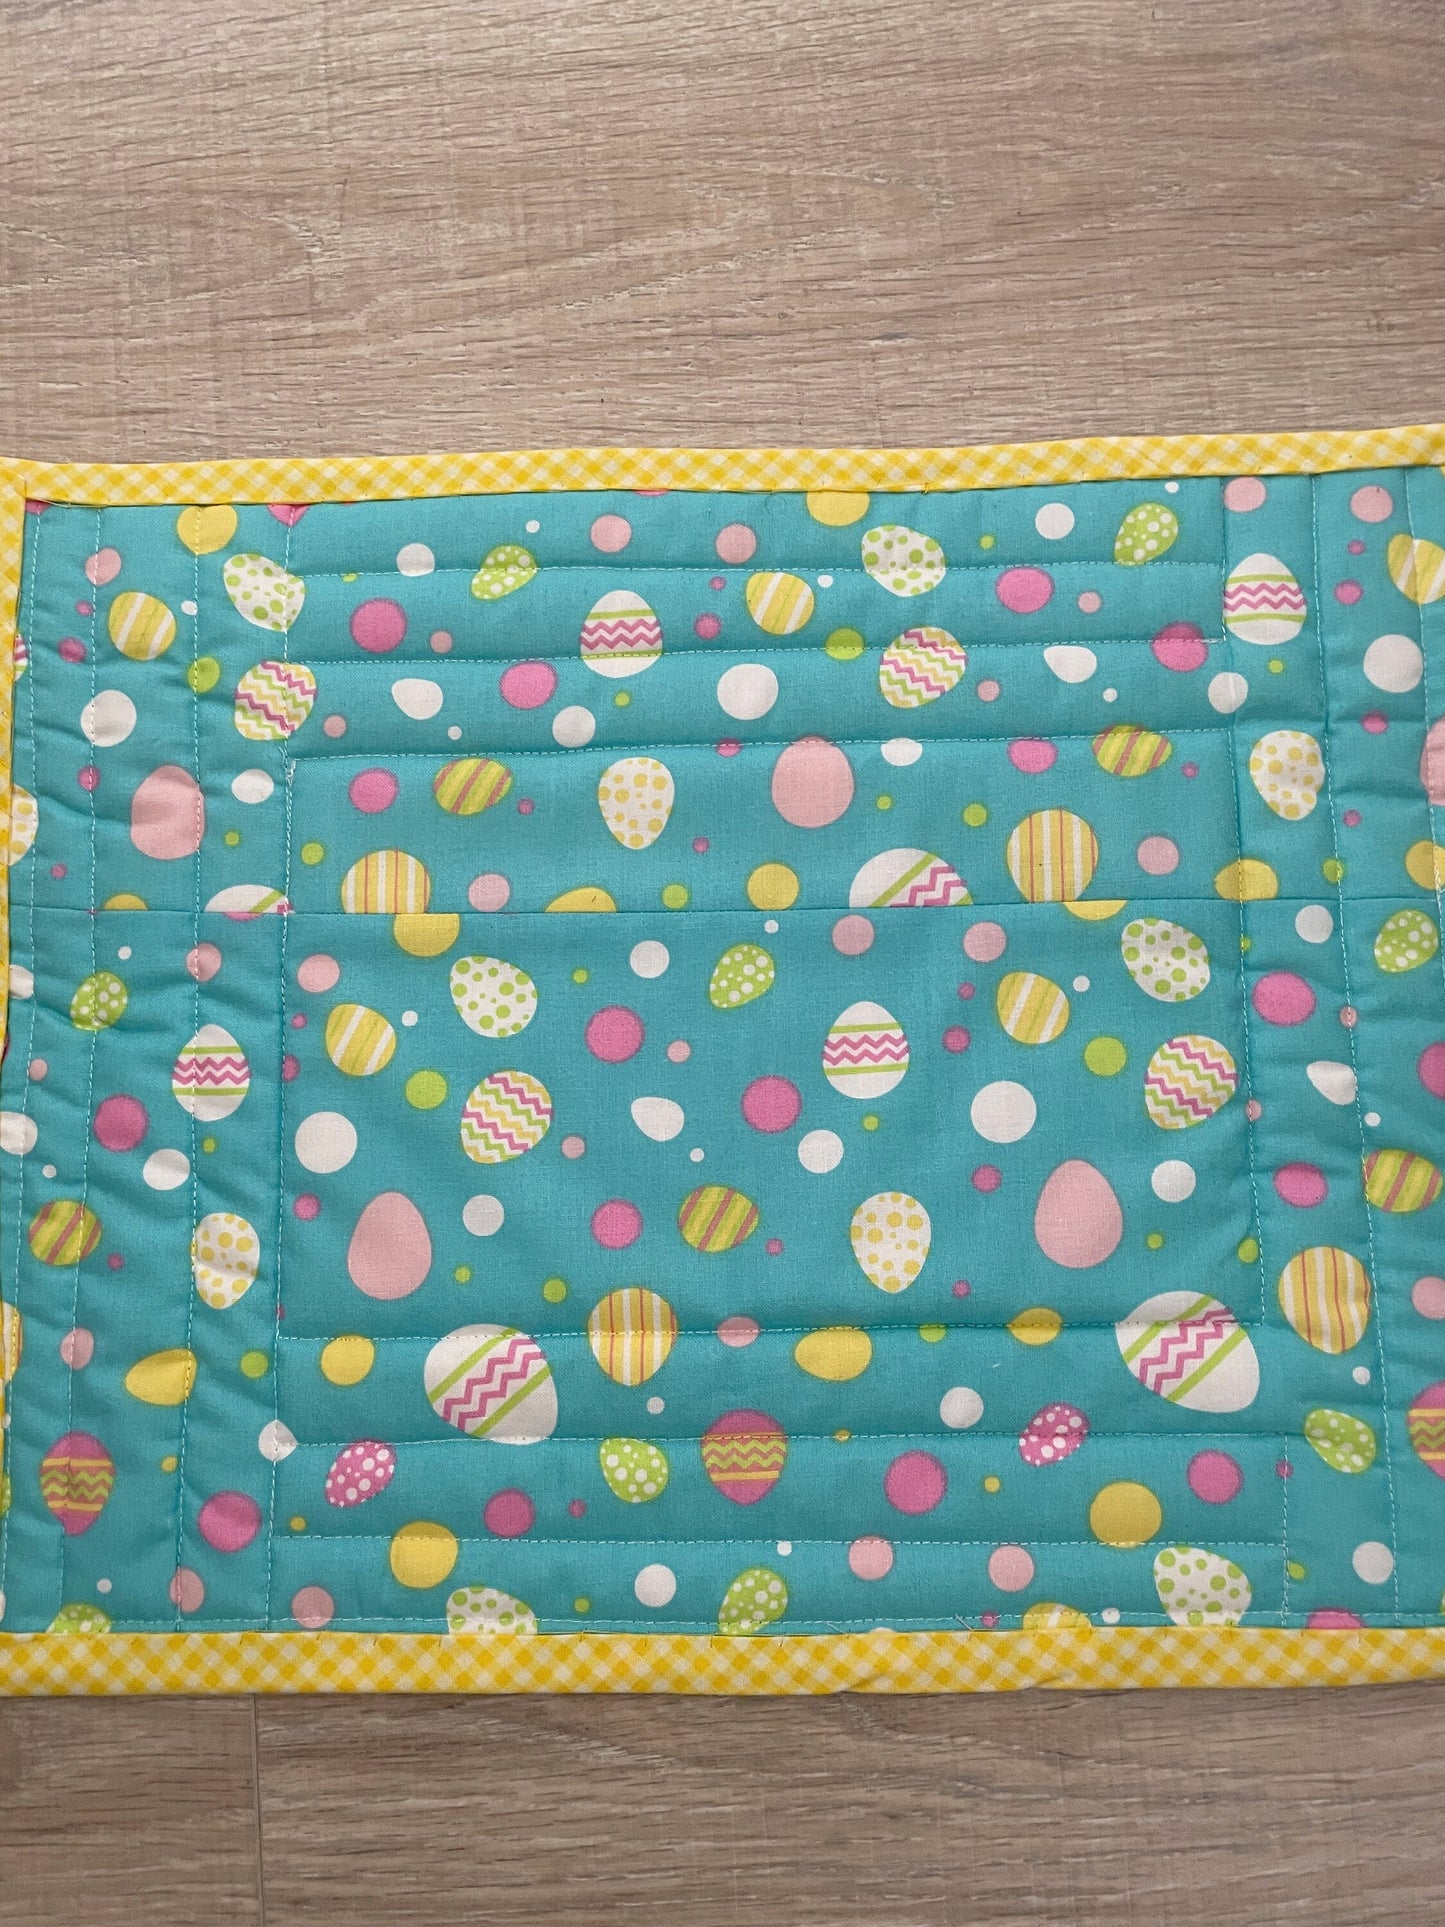 back of quilted casserole hot pad blue and yellow easter egg fabric